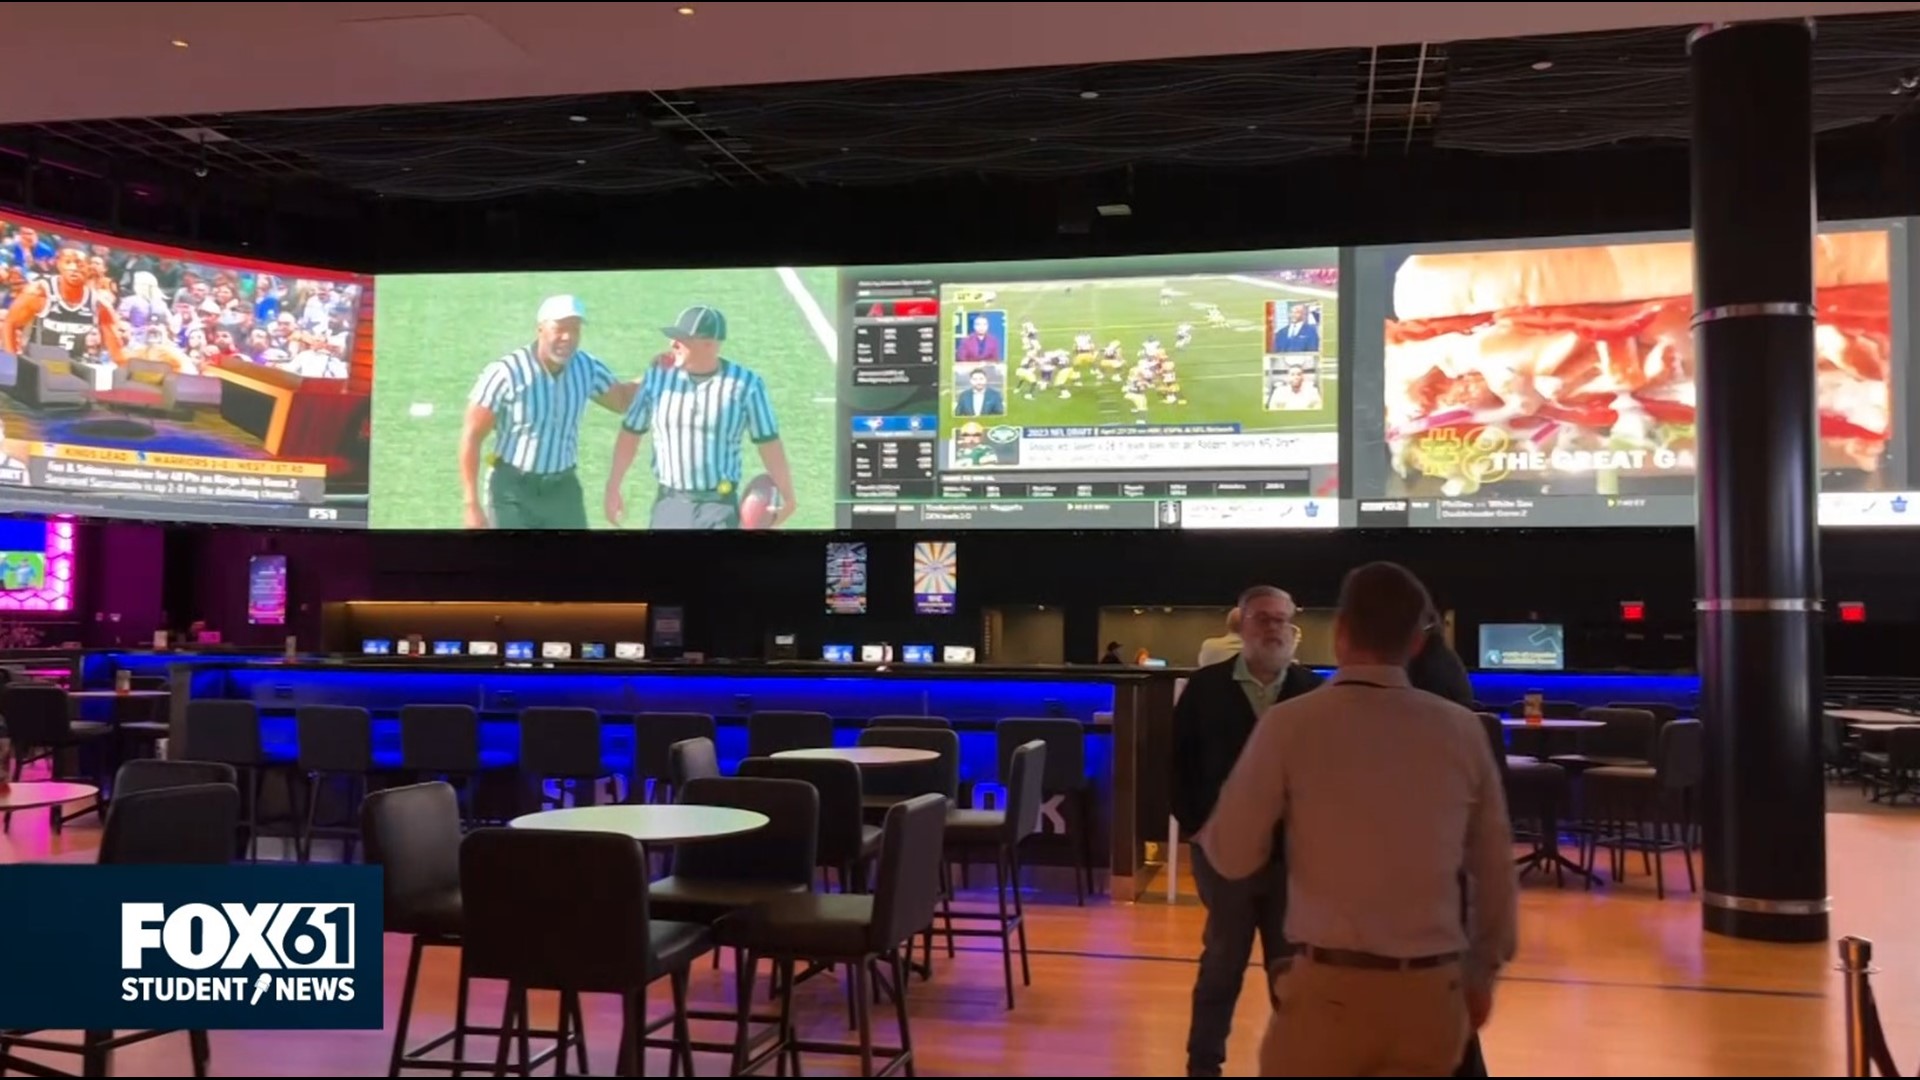 With the legalization of sports betting in Connecticut and around the country, gambling's popularity has increased.